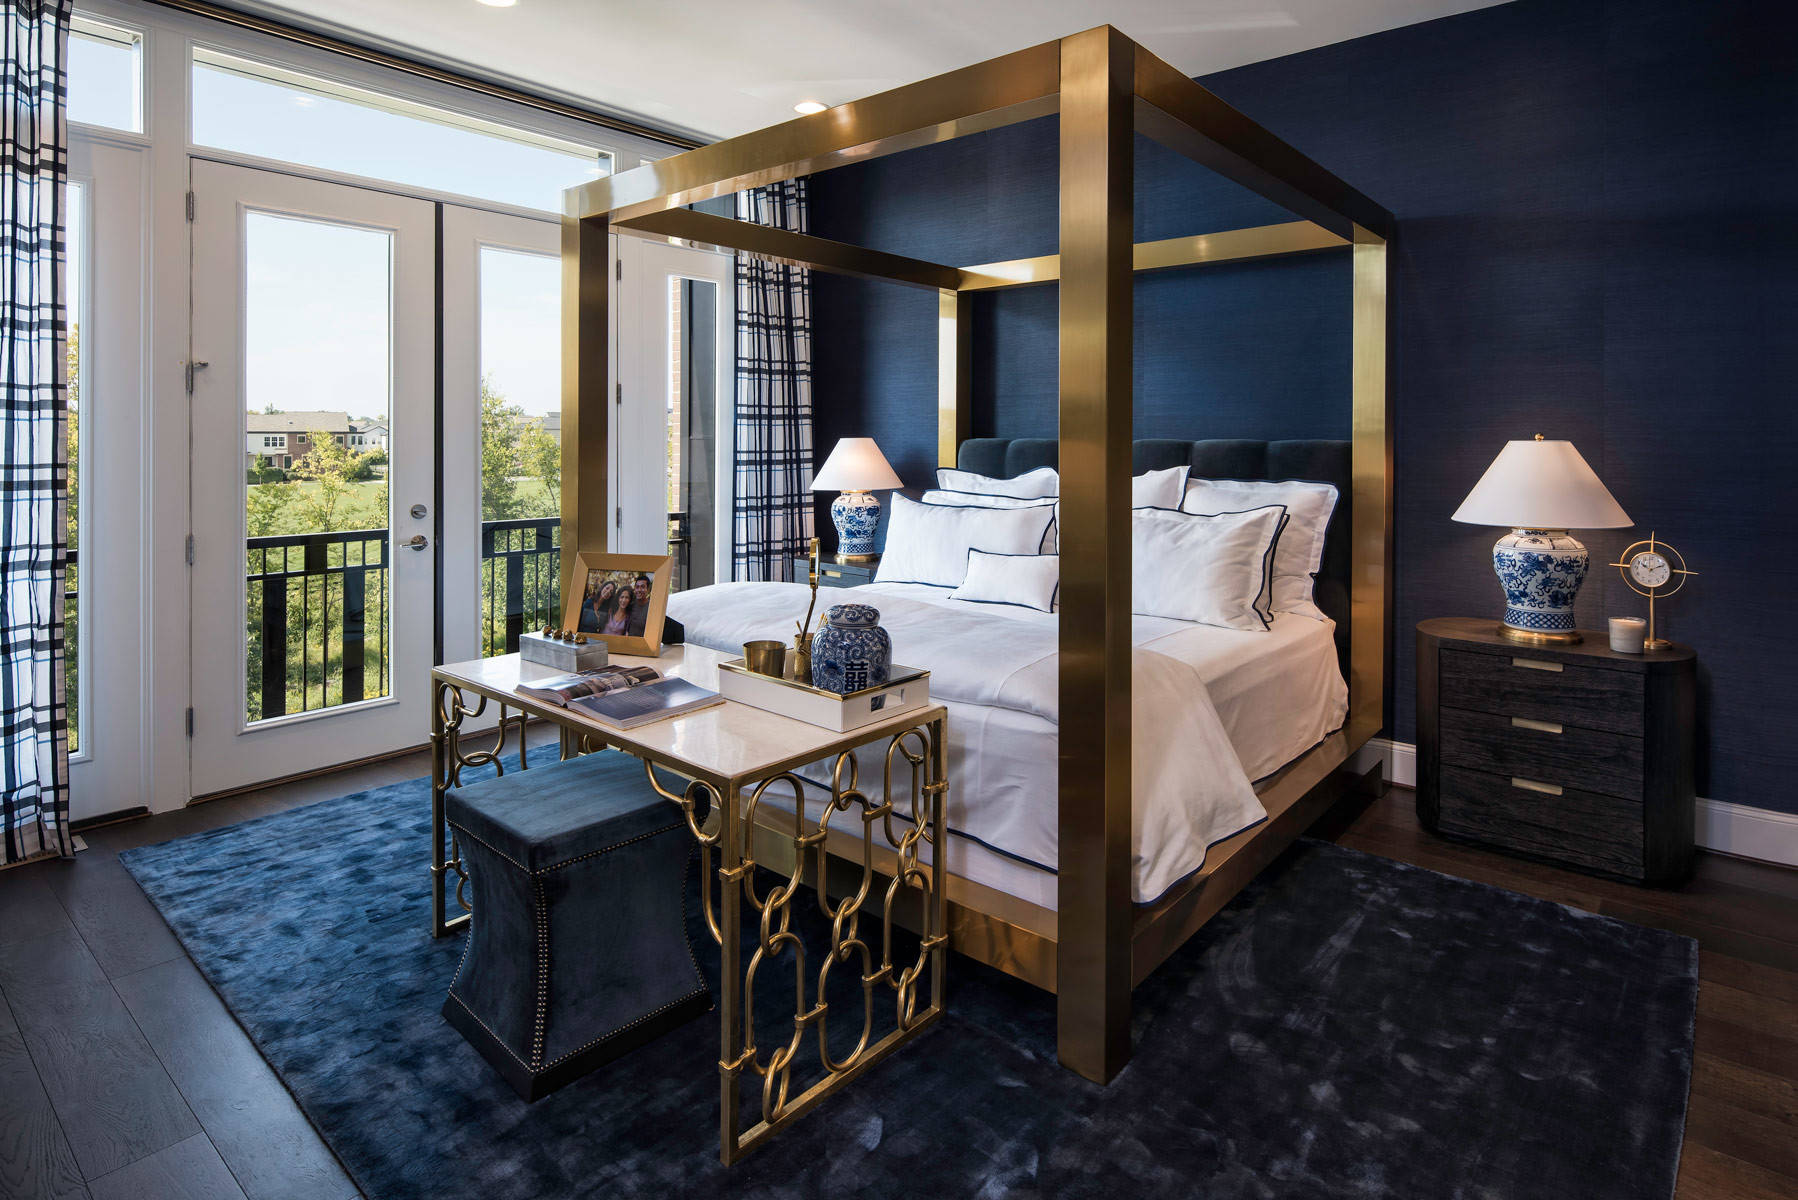 Navy Gold Bedroom Ideas And Photos Houzz